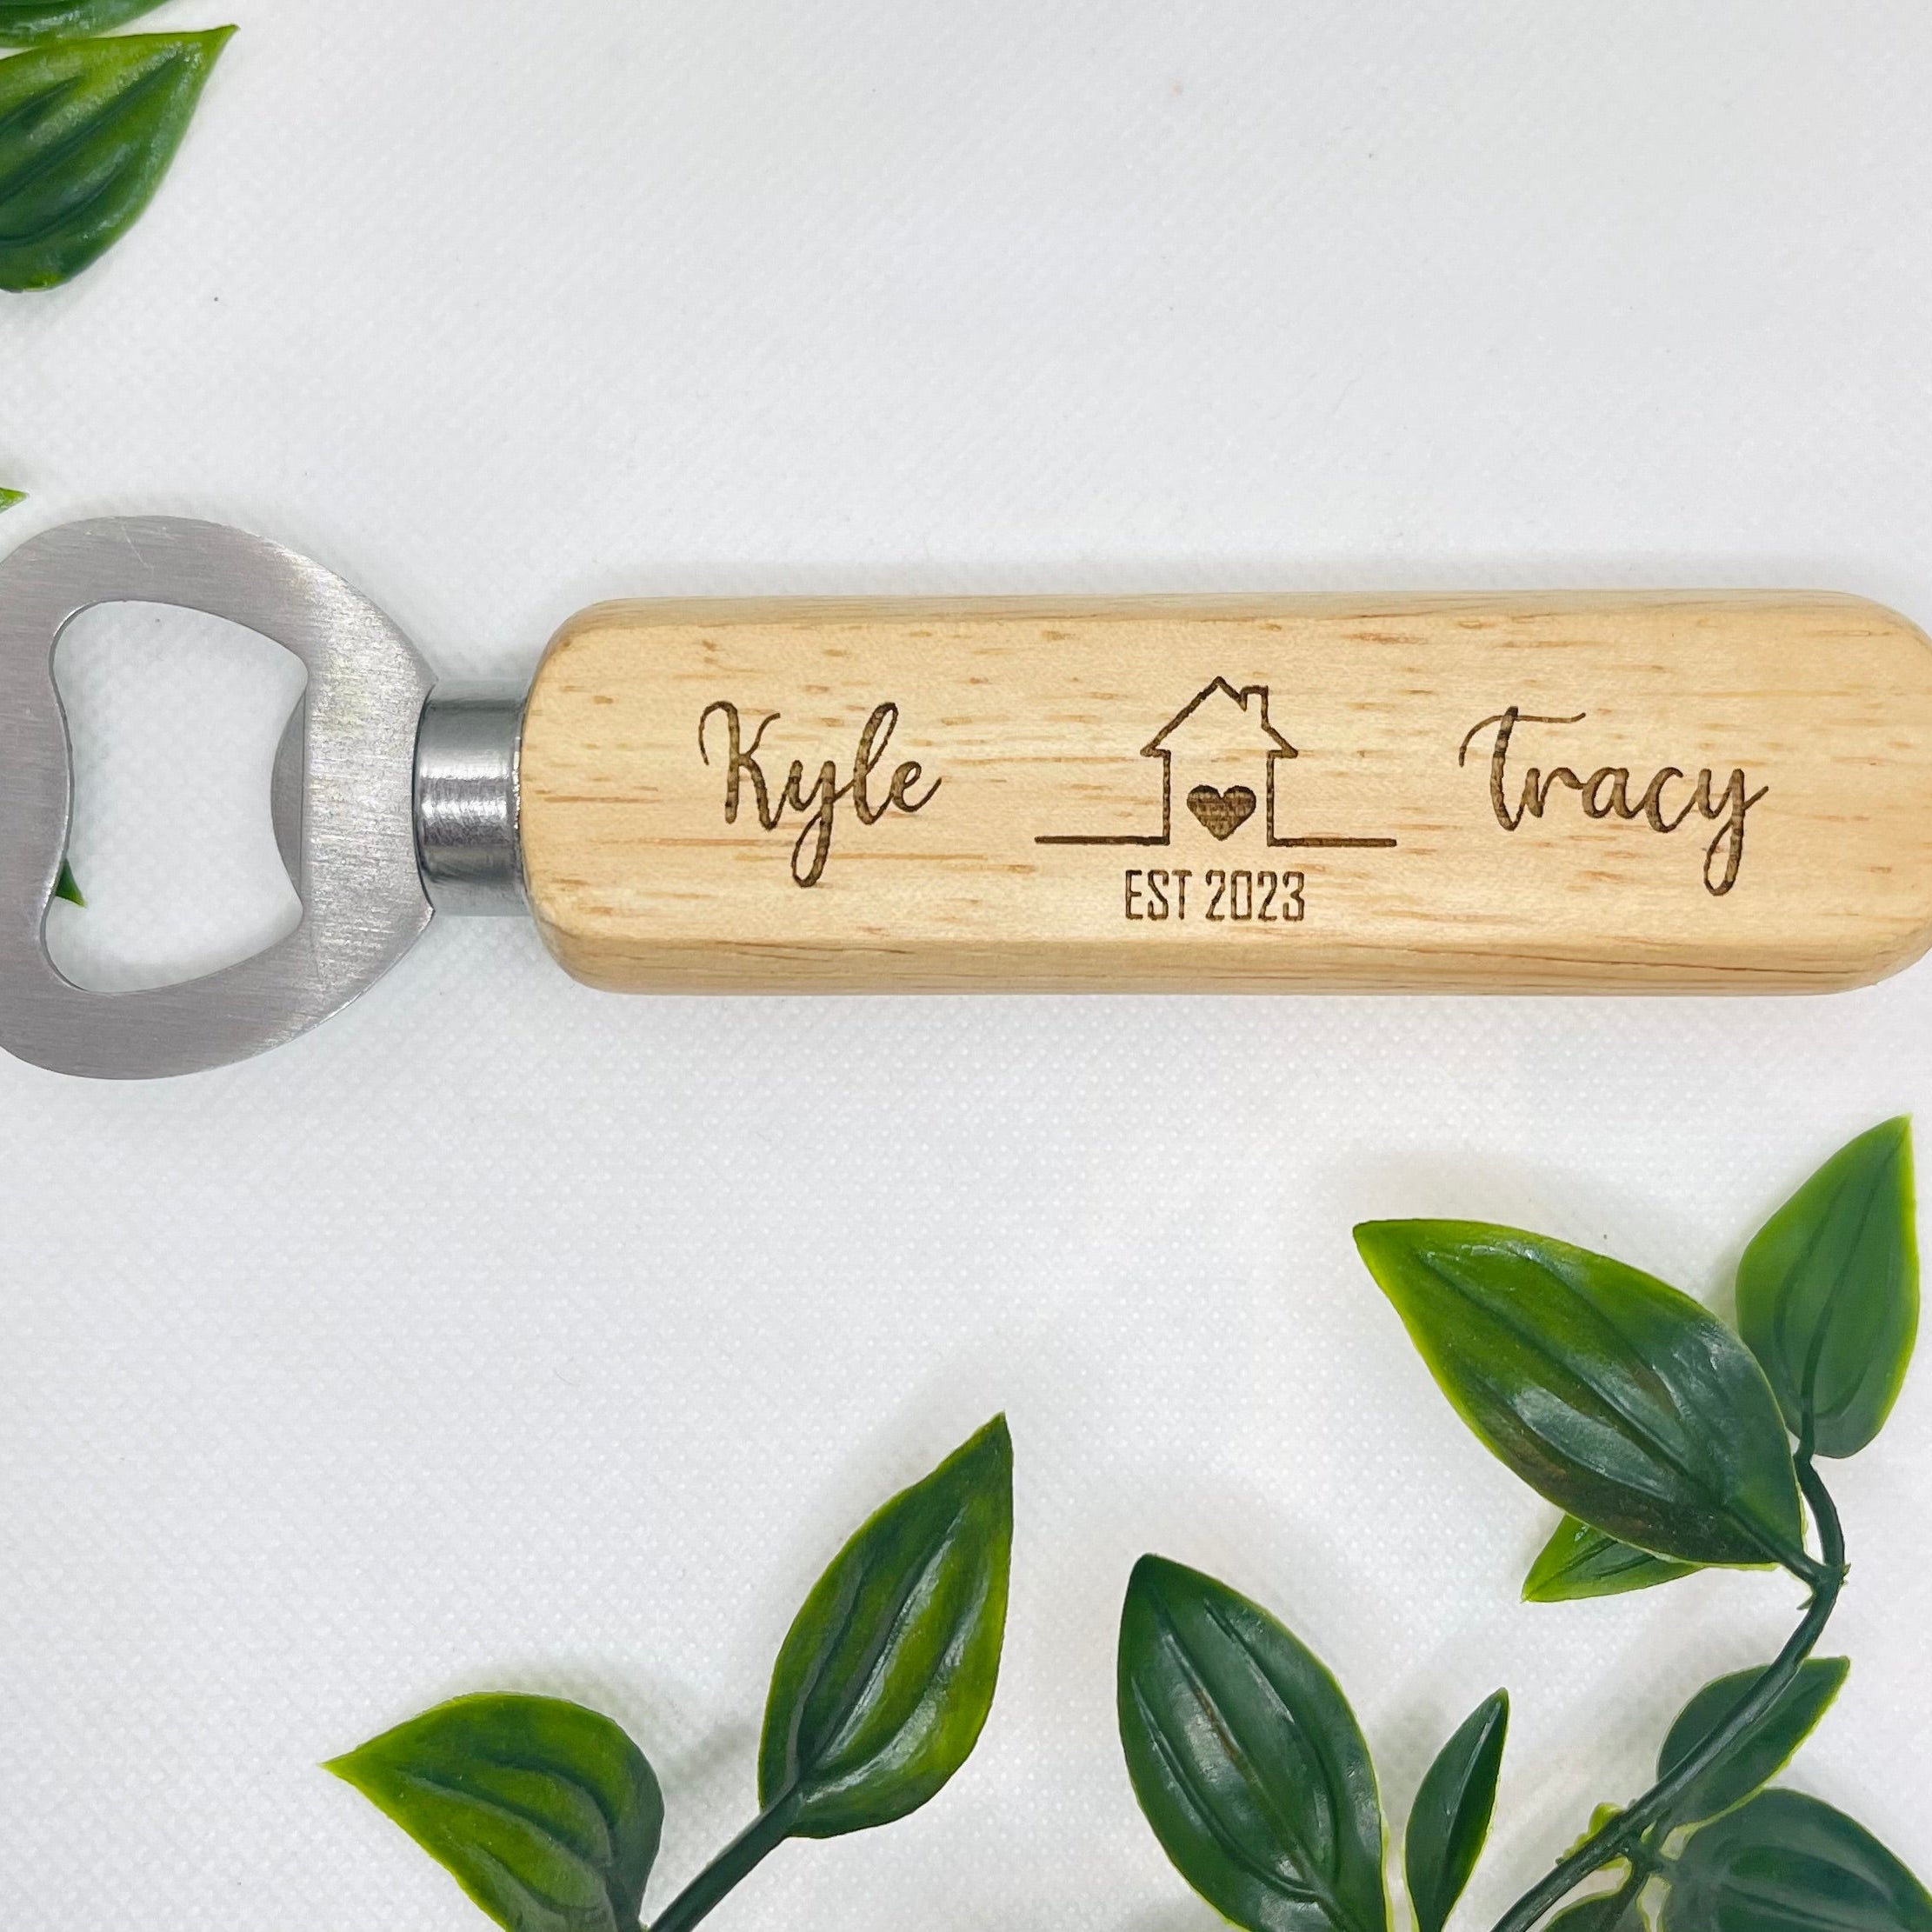 Personalised bottle opener with custom engraving, perfect for alcoholic and non-alcoholic beverages. Crafted for special occasions, birthdays, weddings, and stag dos. Practical yet sentimental gifts from Rowland Designs. Explore now!